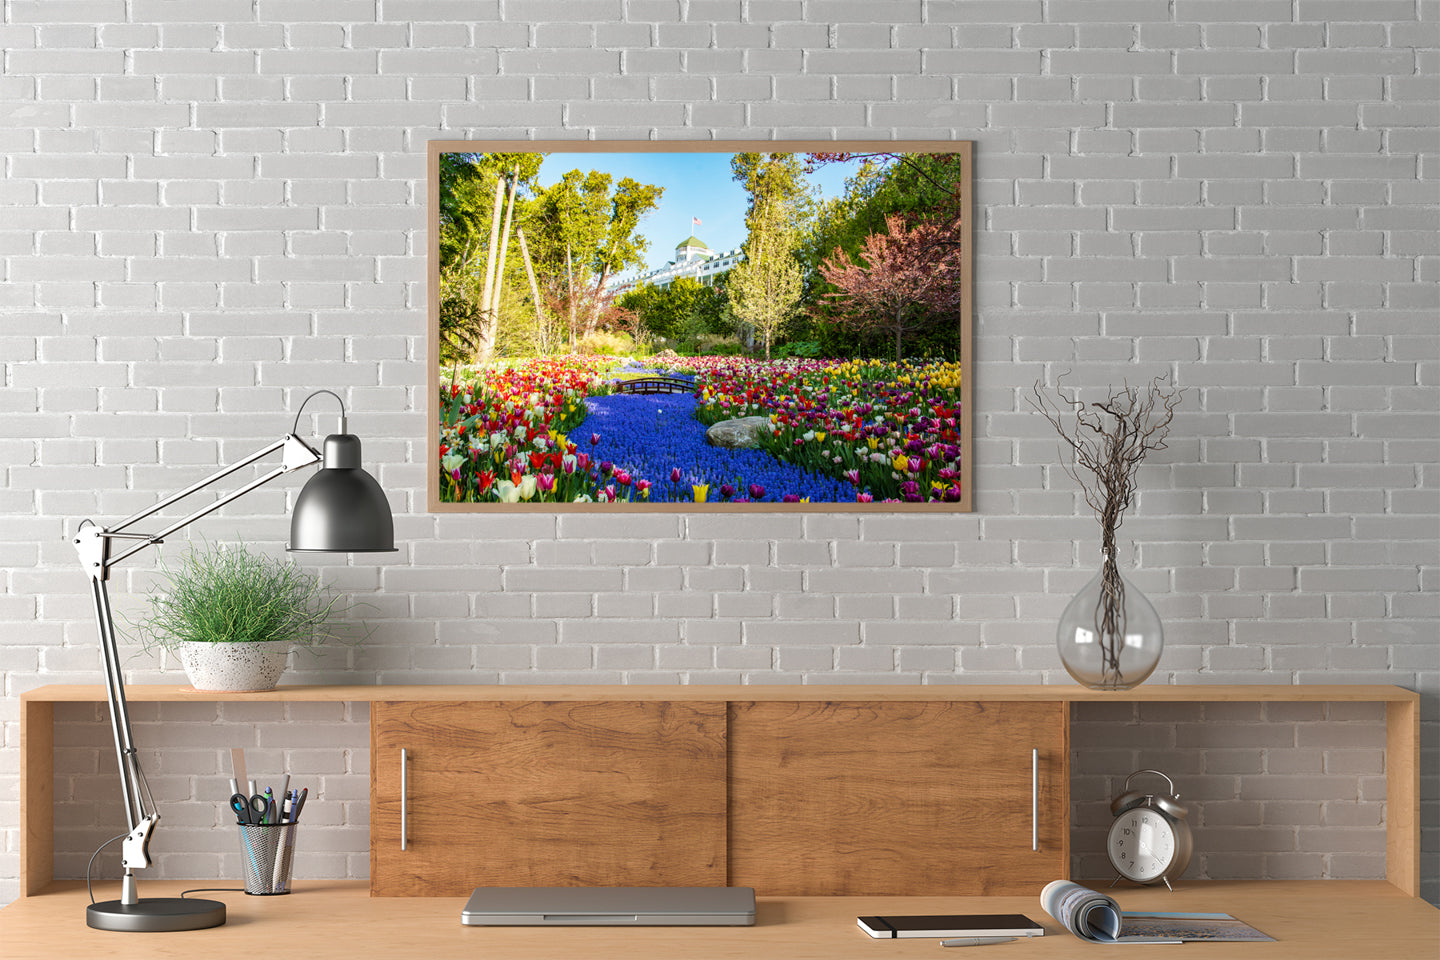 Savor your memories of Mackinac Island with Grand Hotel wall art.  This Mackinac Island photograph by Jennifer Wohletz features a river of grape hyacinths and brightly colored tulips is a cheerful feast for your senses in Grand Hotel's Secret Garden.